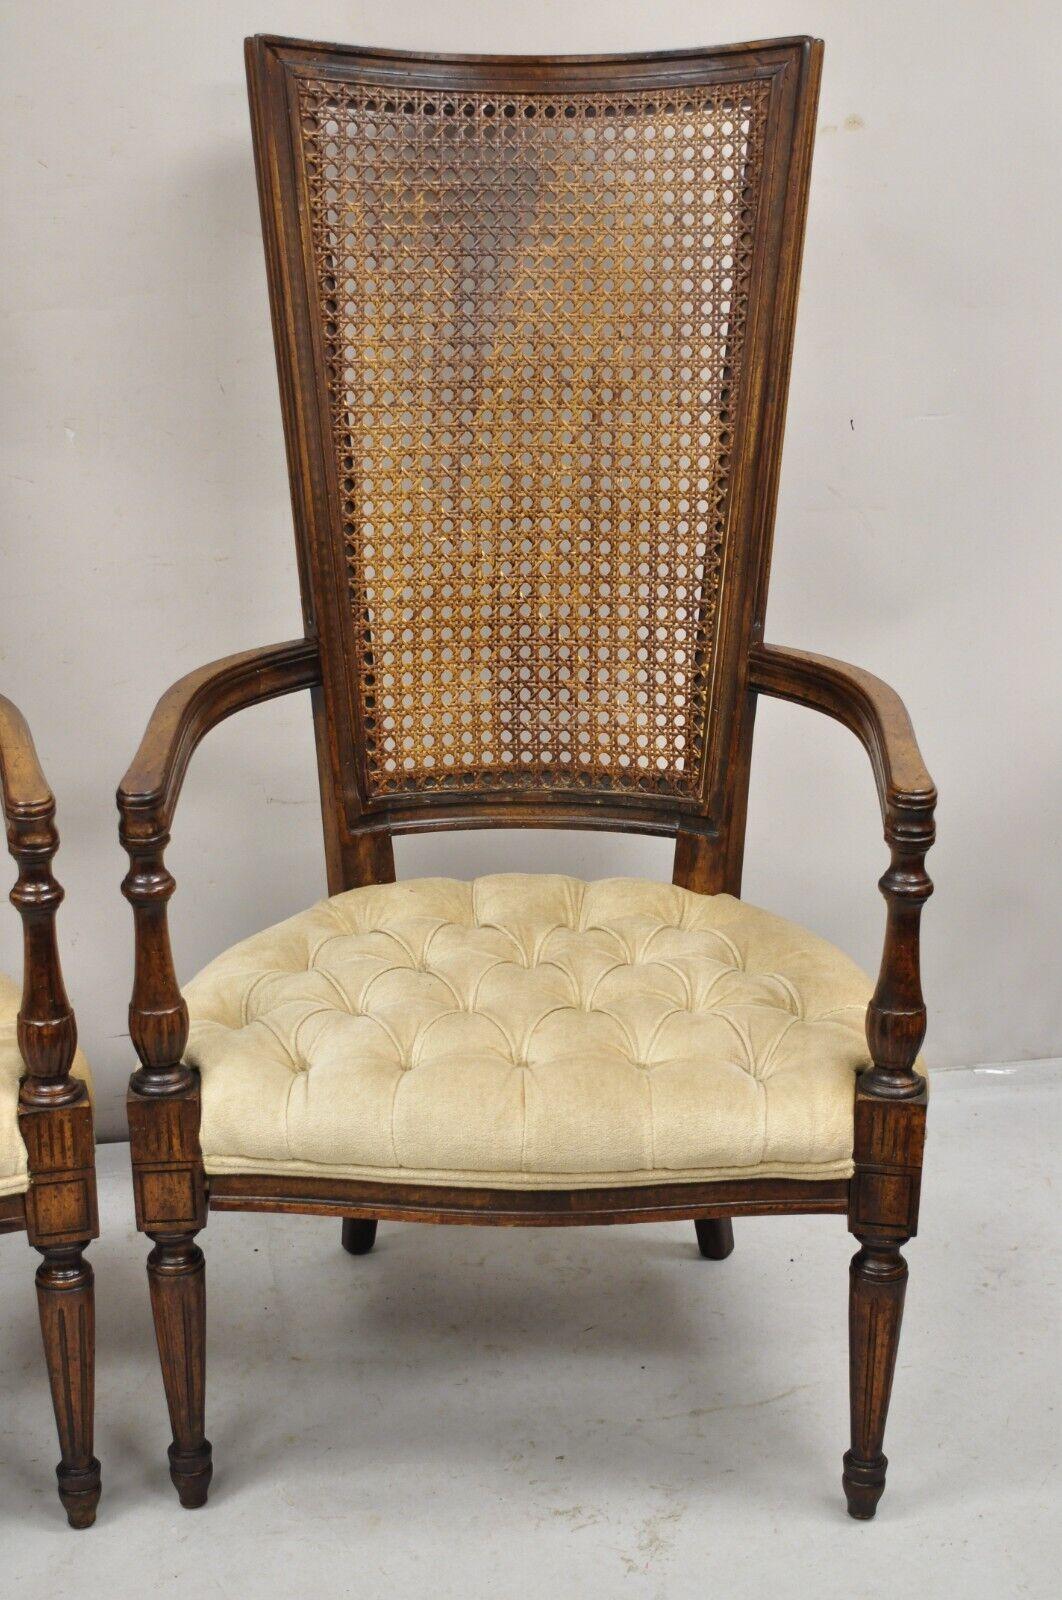 Vintage Hollywood Regency Tall Cane Back Fireside Lounge Armchairs - a Pair For Sale 4